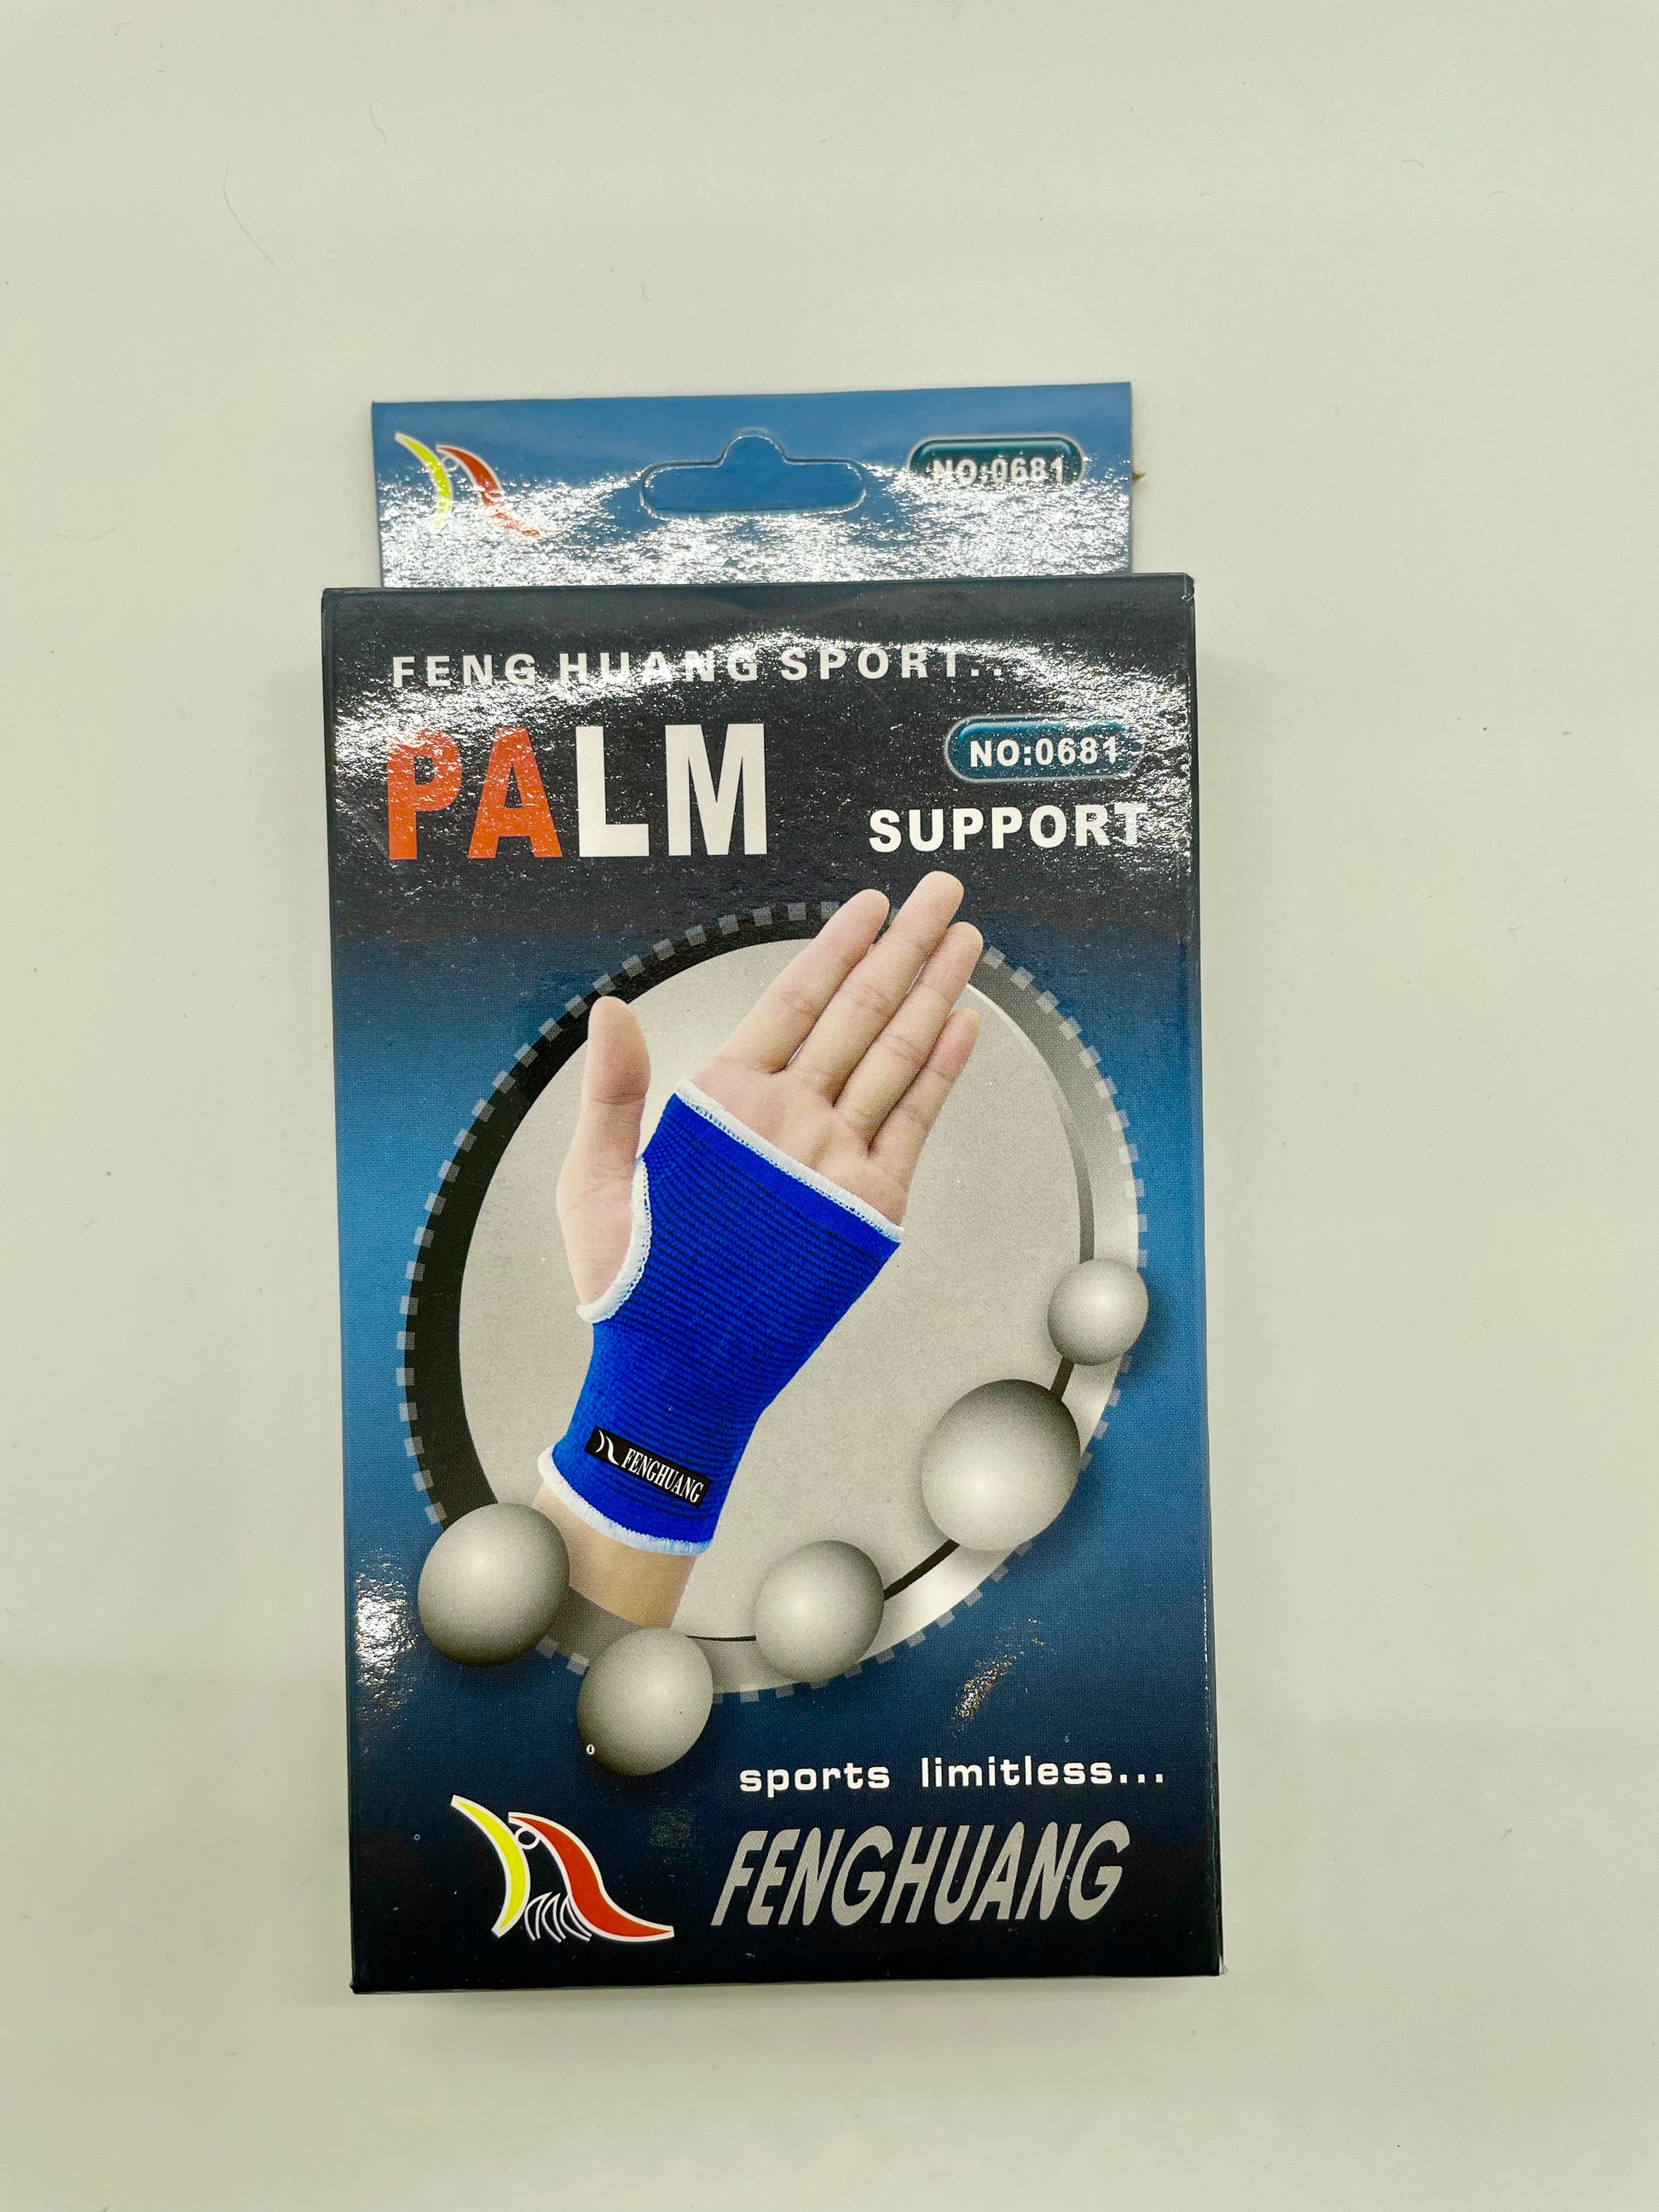 Palm brace with a breathable mesh design and wrist support